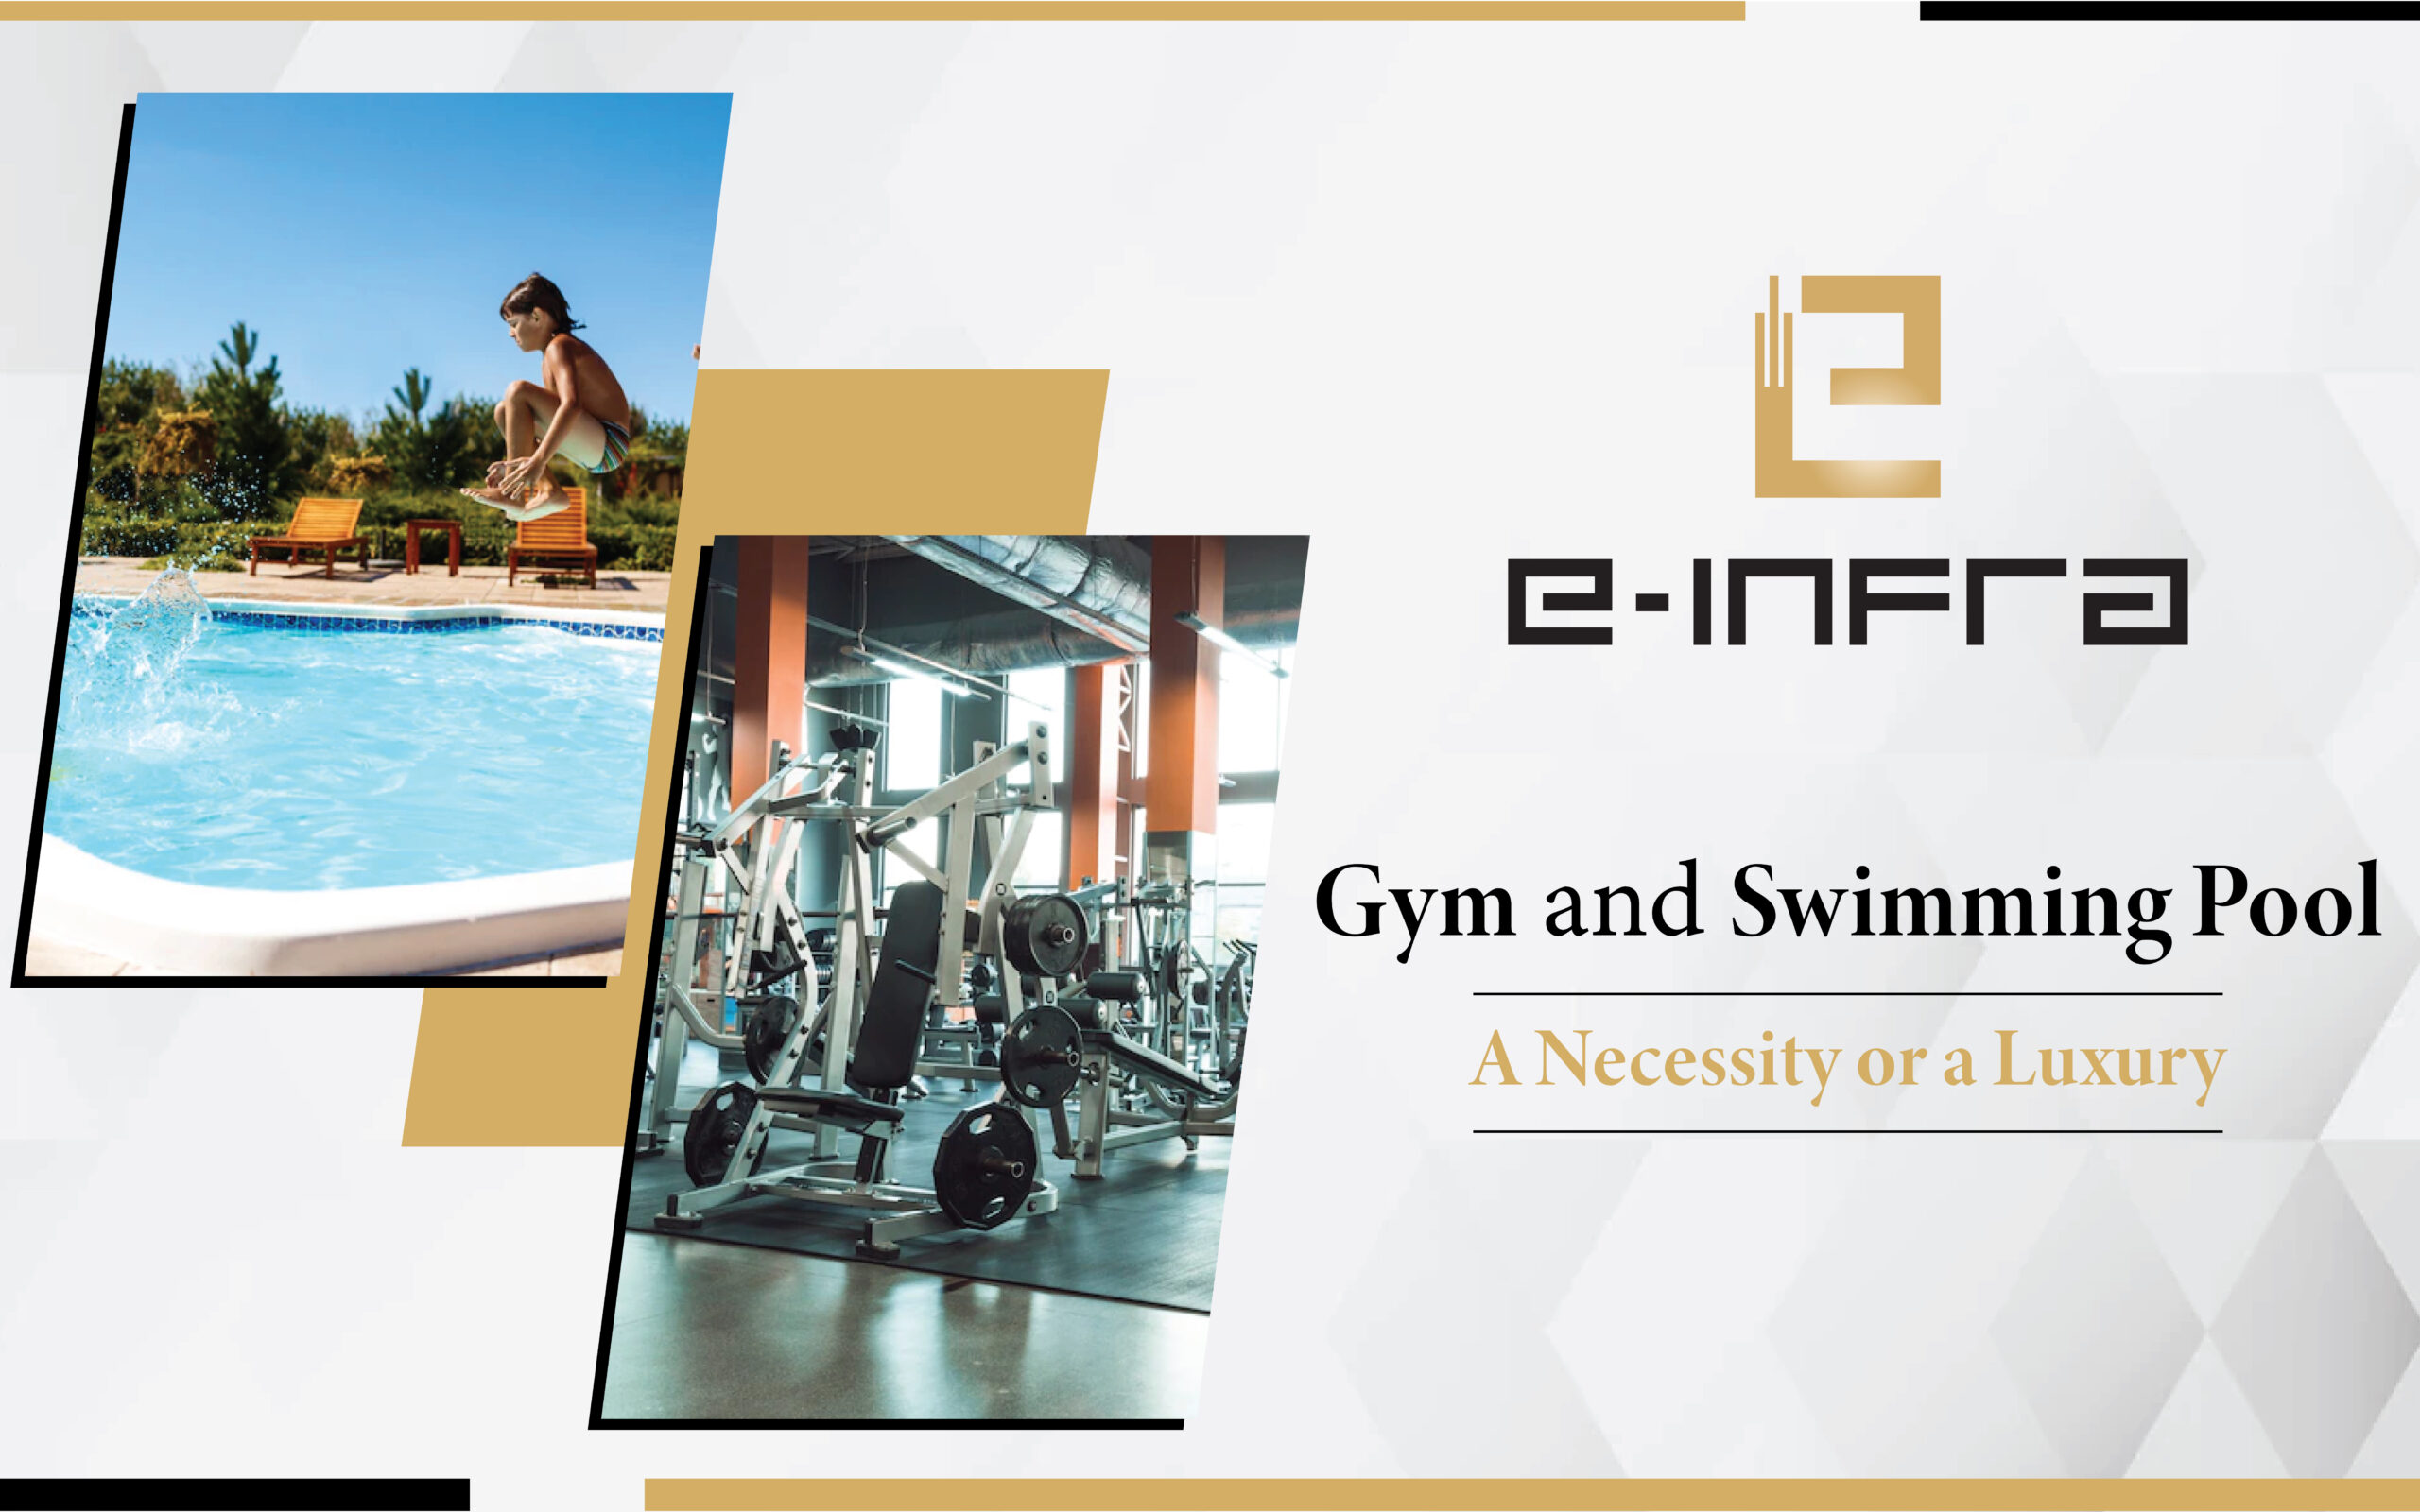 Gym and Swimming Pool- A Necessity or a Luxury